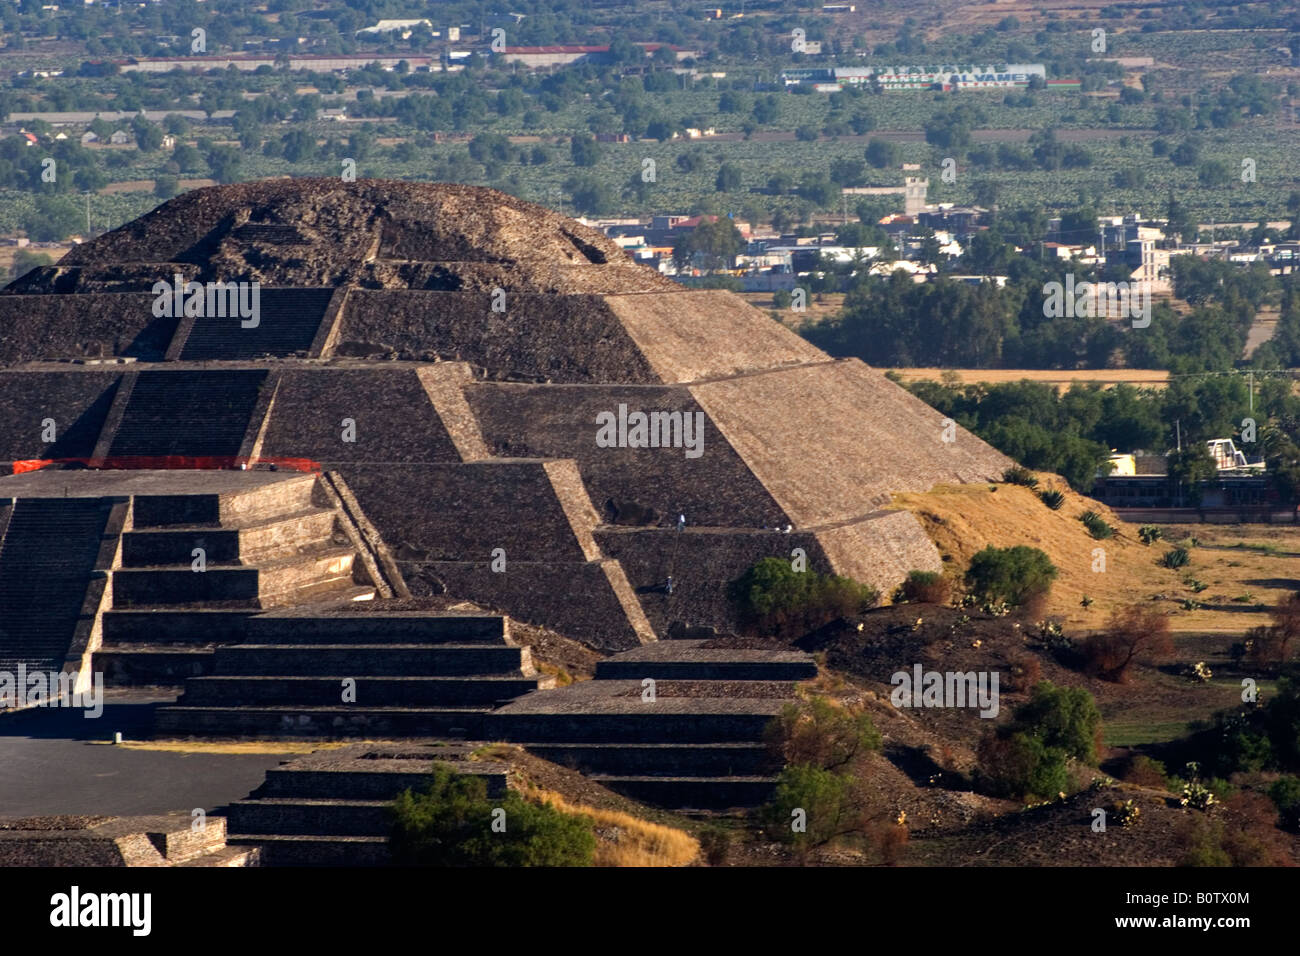 Teotihuacan's Pyramid of the Moon, the third largest pyramid in Mexico and the Americas. Stock Photo